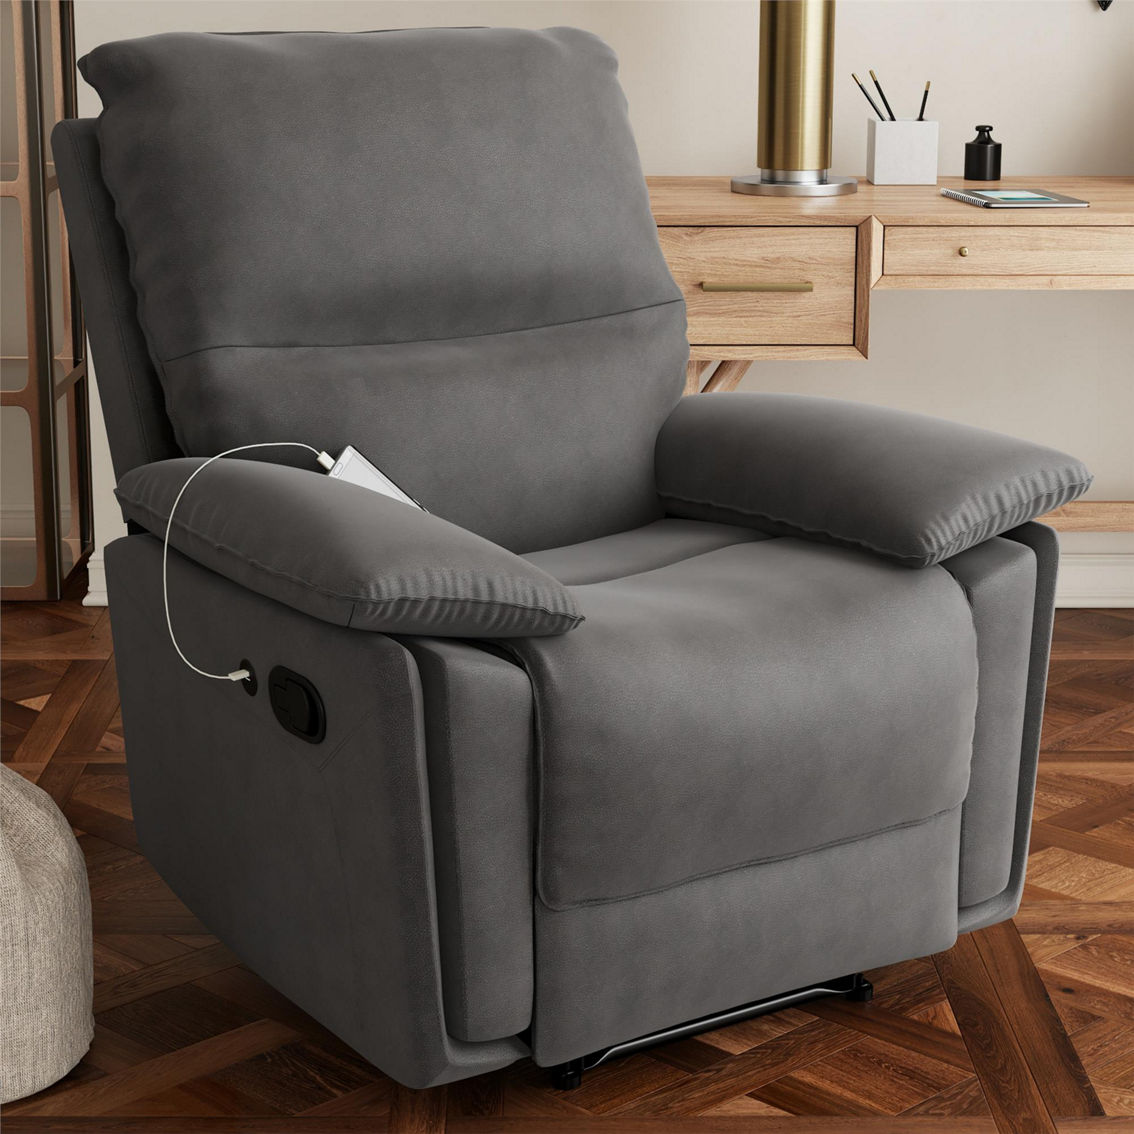 DHP Labatte Recliner with Dual USB Port, Charcoal Faux Leather - Image 7 of 8